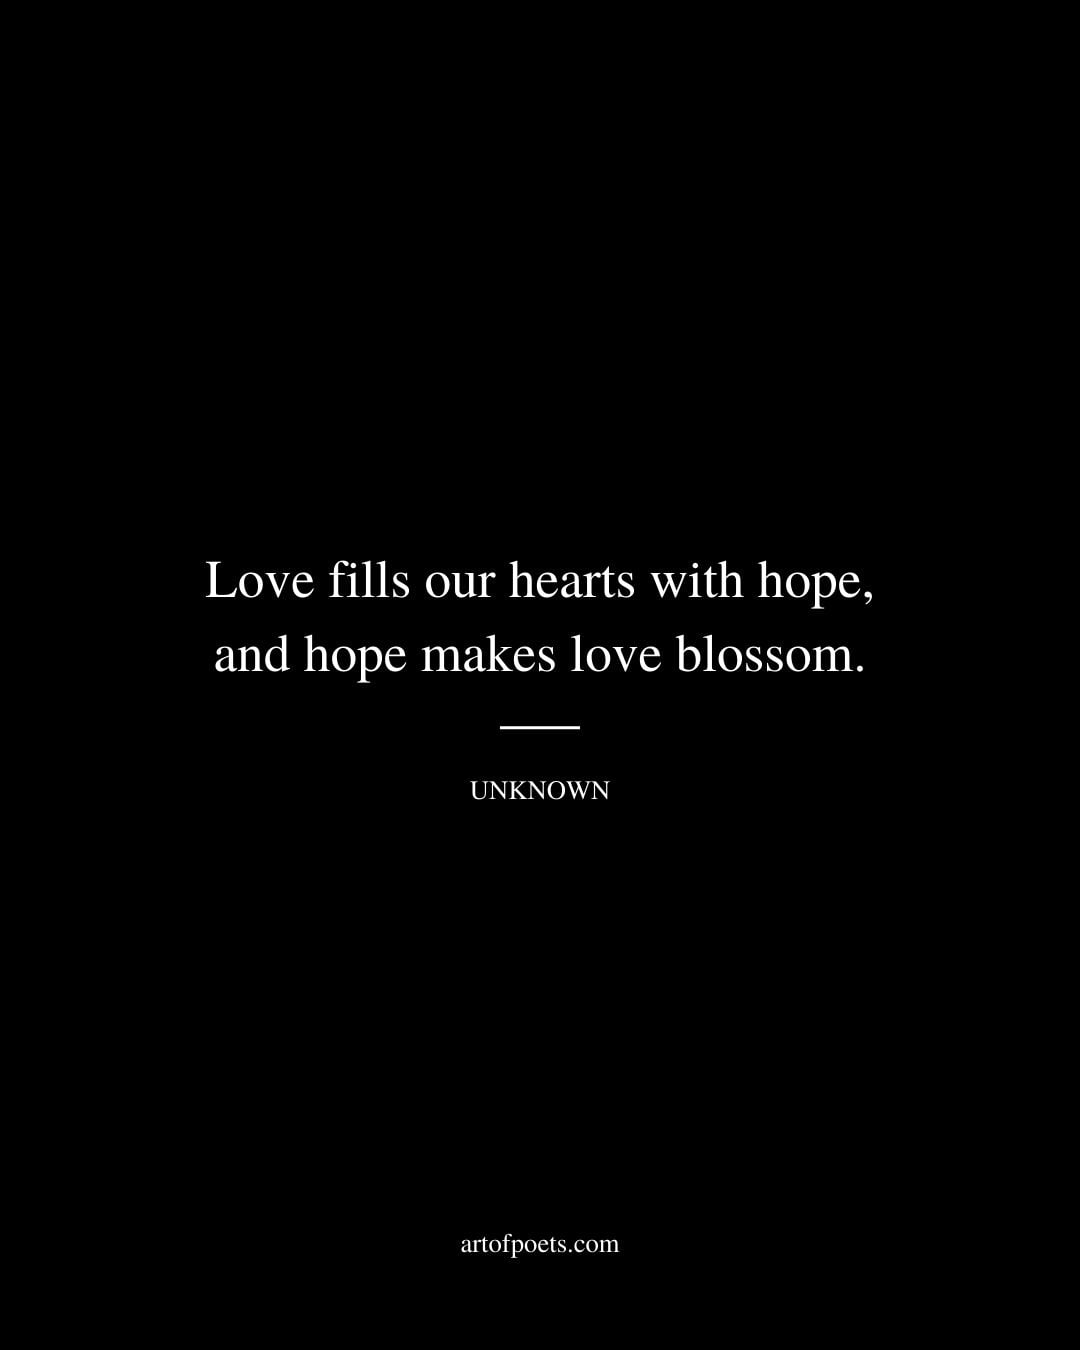 Love fills our hearts with hope and hope makes love blossom. Unknown